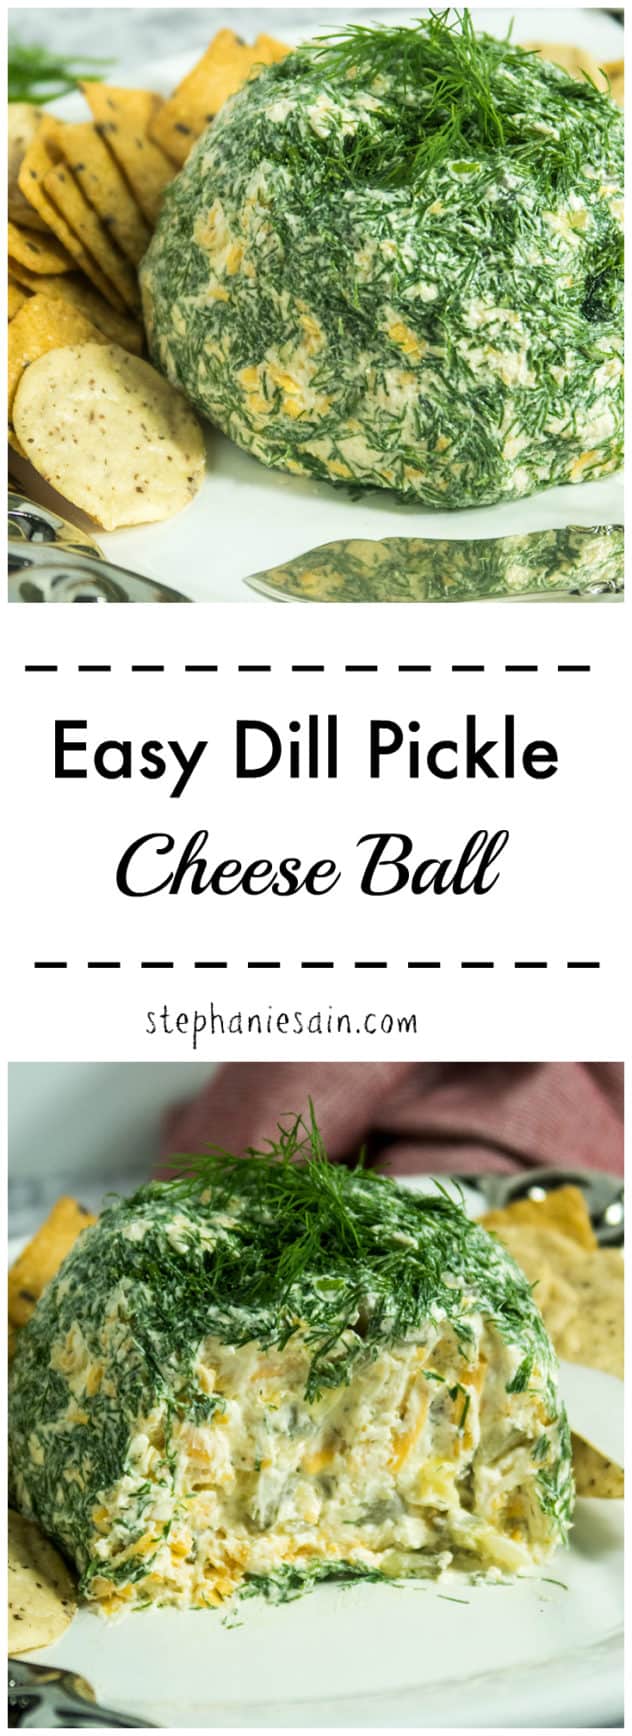 Easy Dill Pickle Cheese Ball is perfect for entertaining and gatherings. Can easily be made ahead quickly for a perfect last minute appetizer. Gluten Free & Vegetarian.